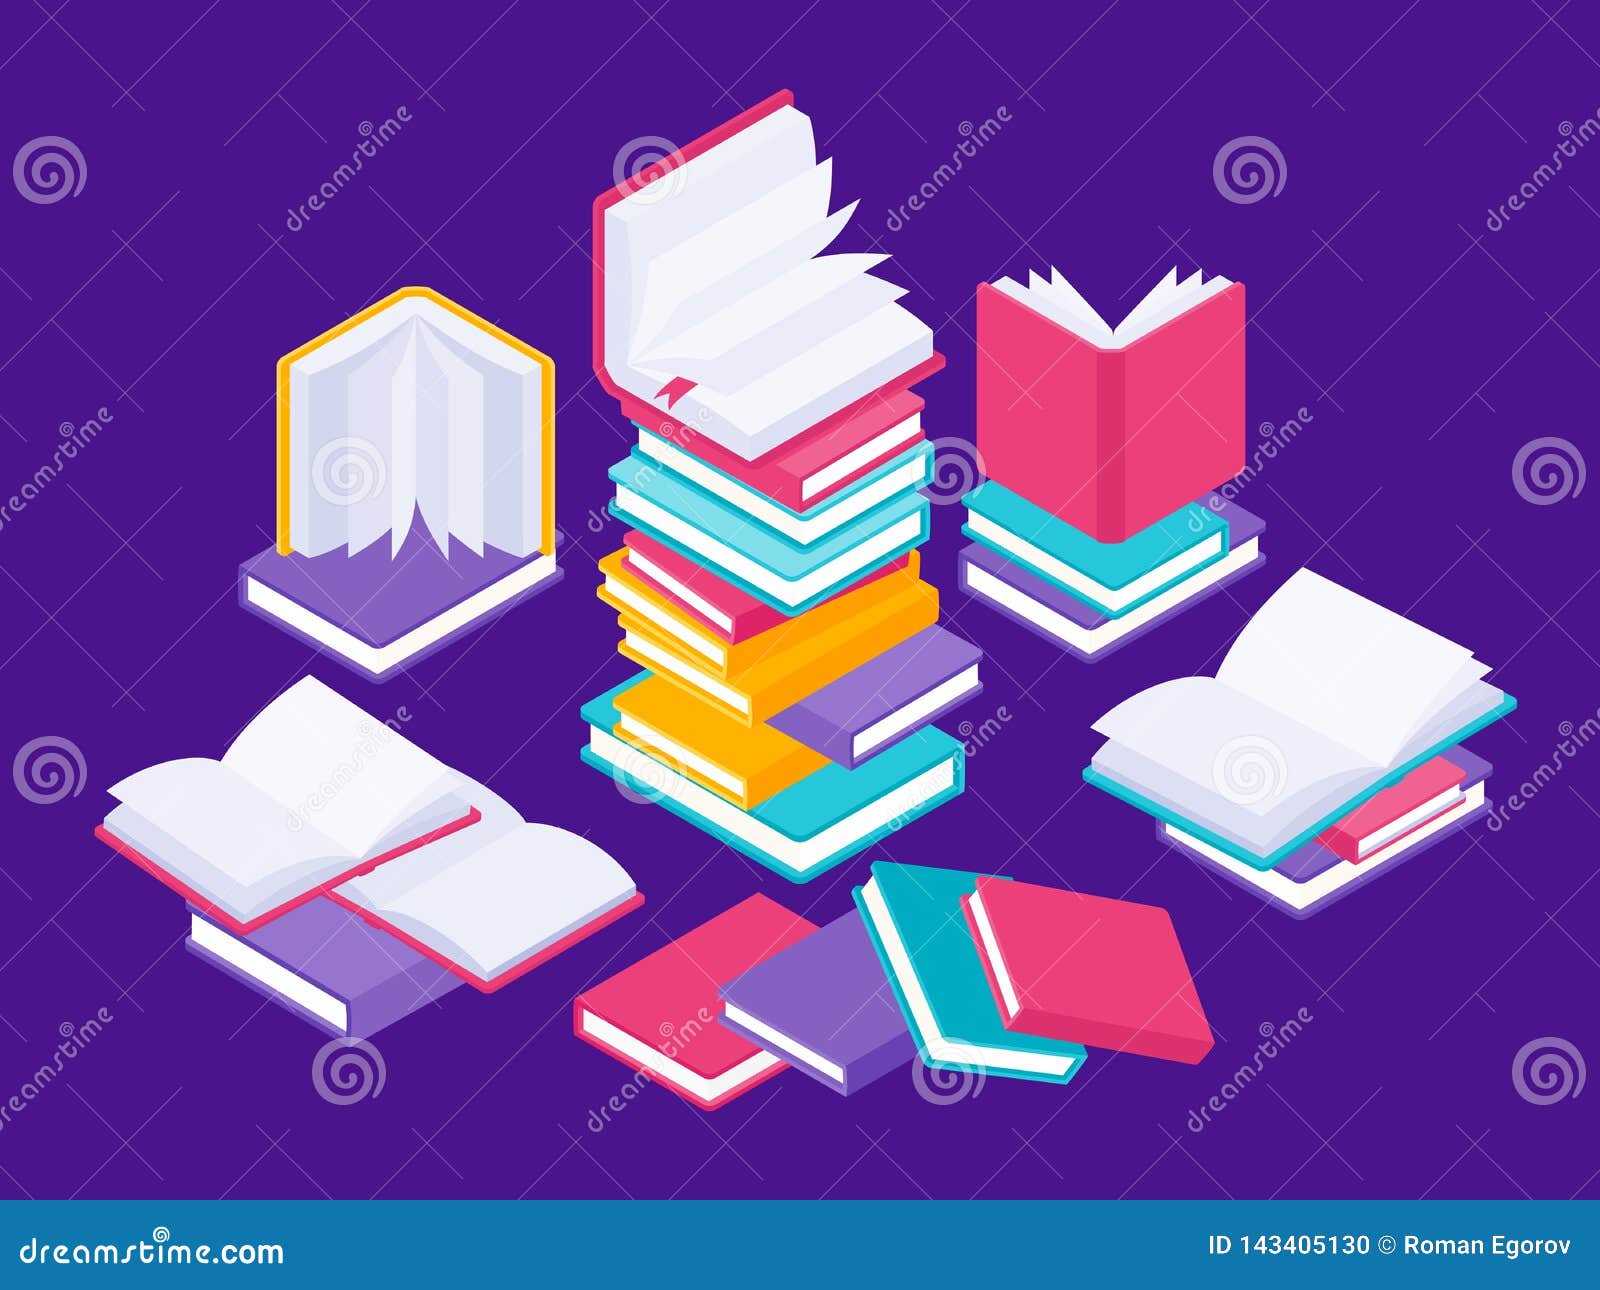 flat books concept. literature school course, university education and tutorials library .  group of